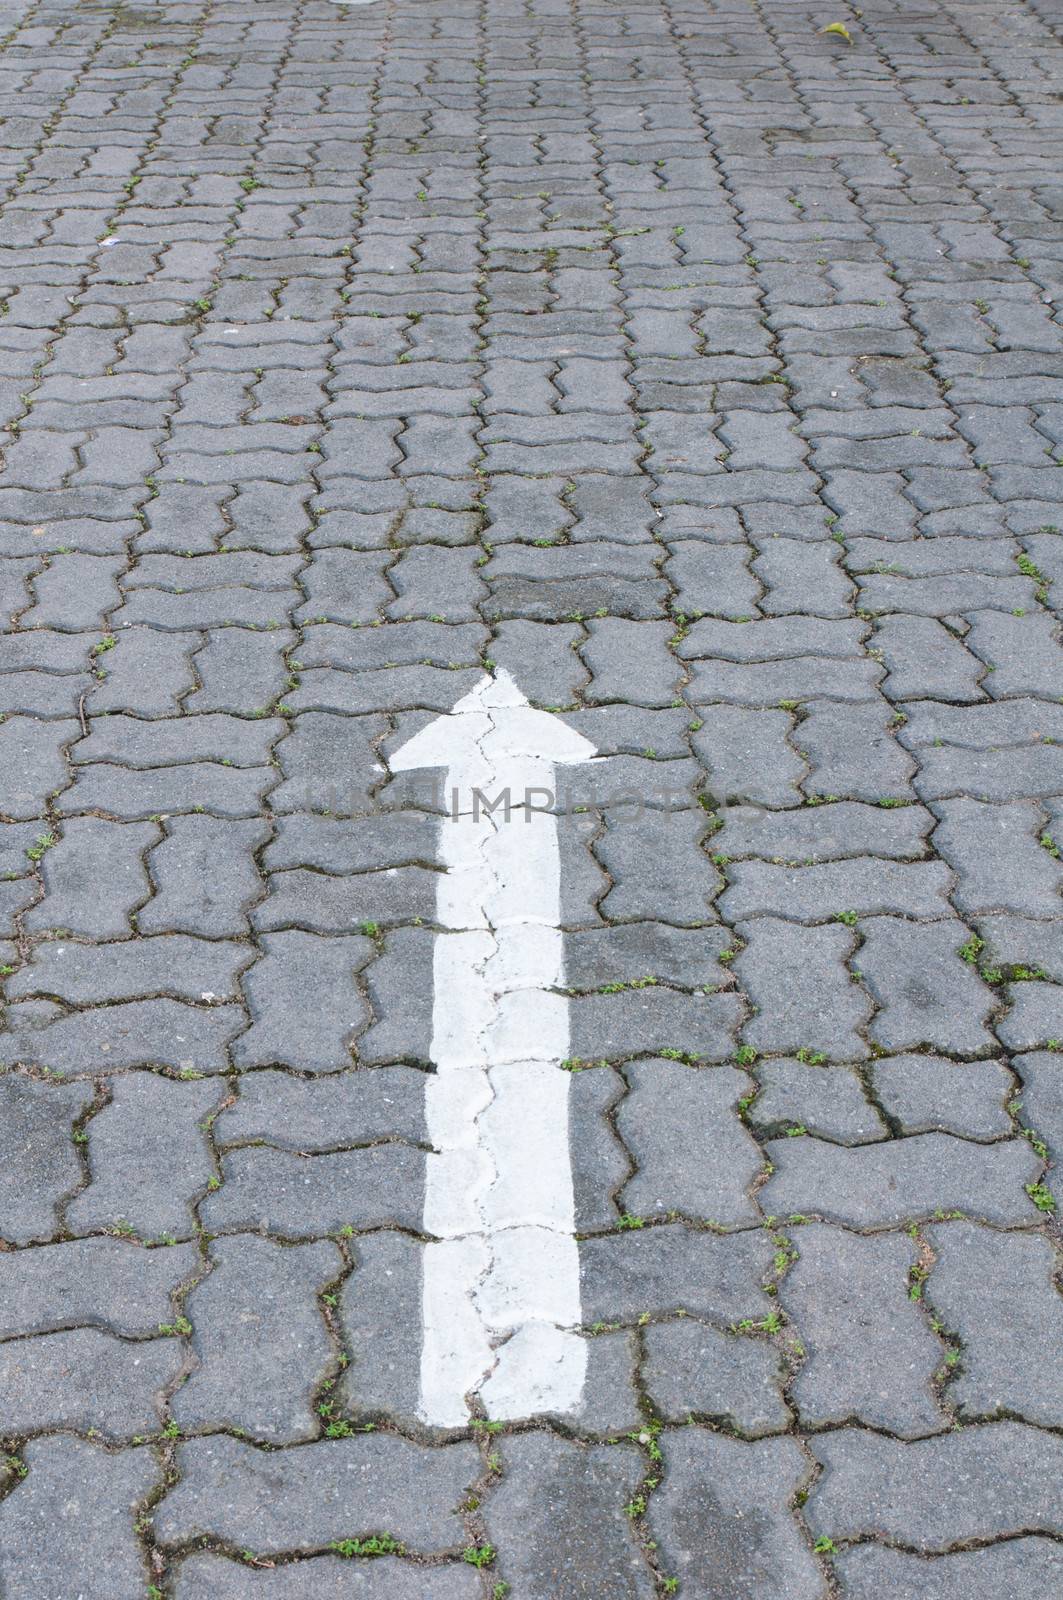 a white arrow marking on the road